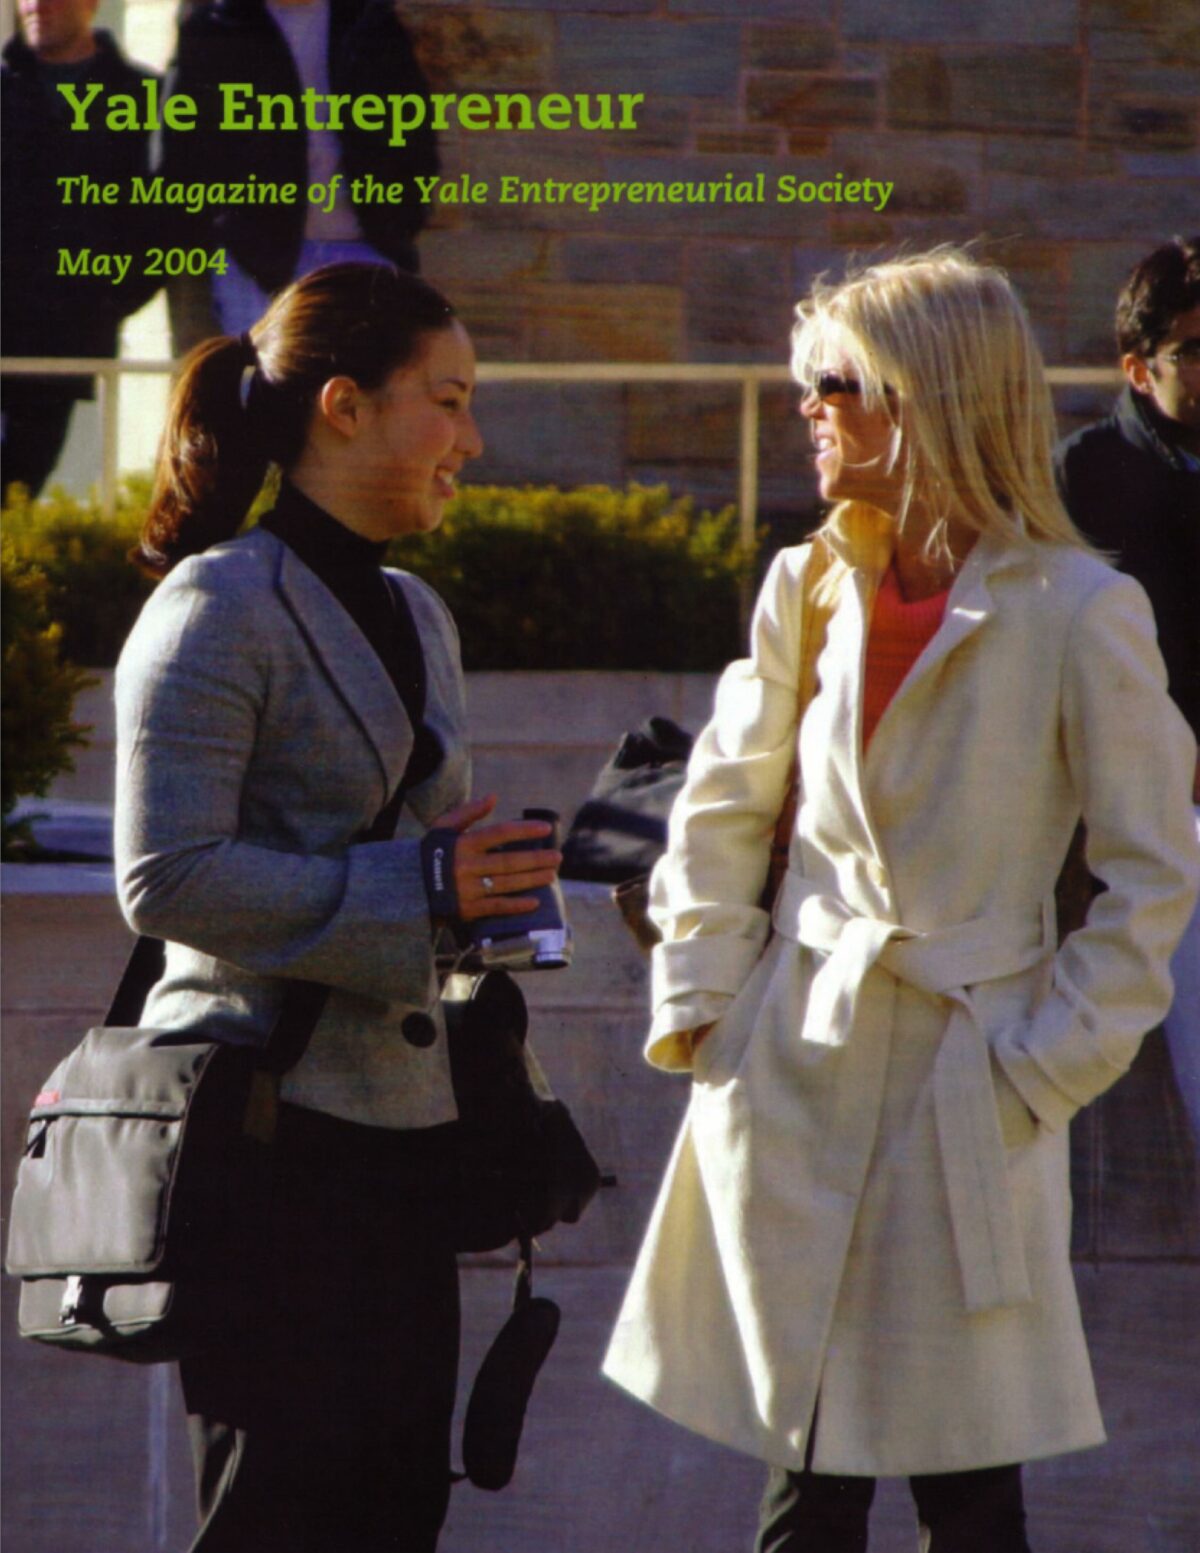 YE May 2004 cover featuring students in conversation